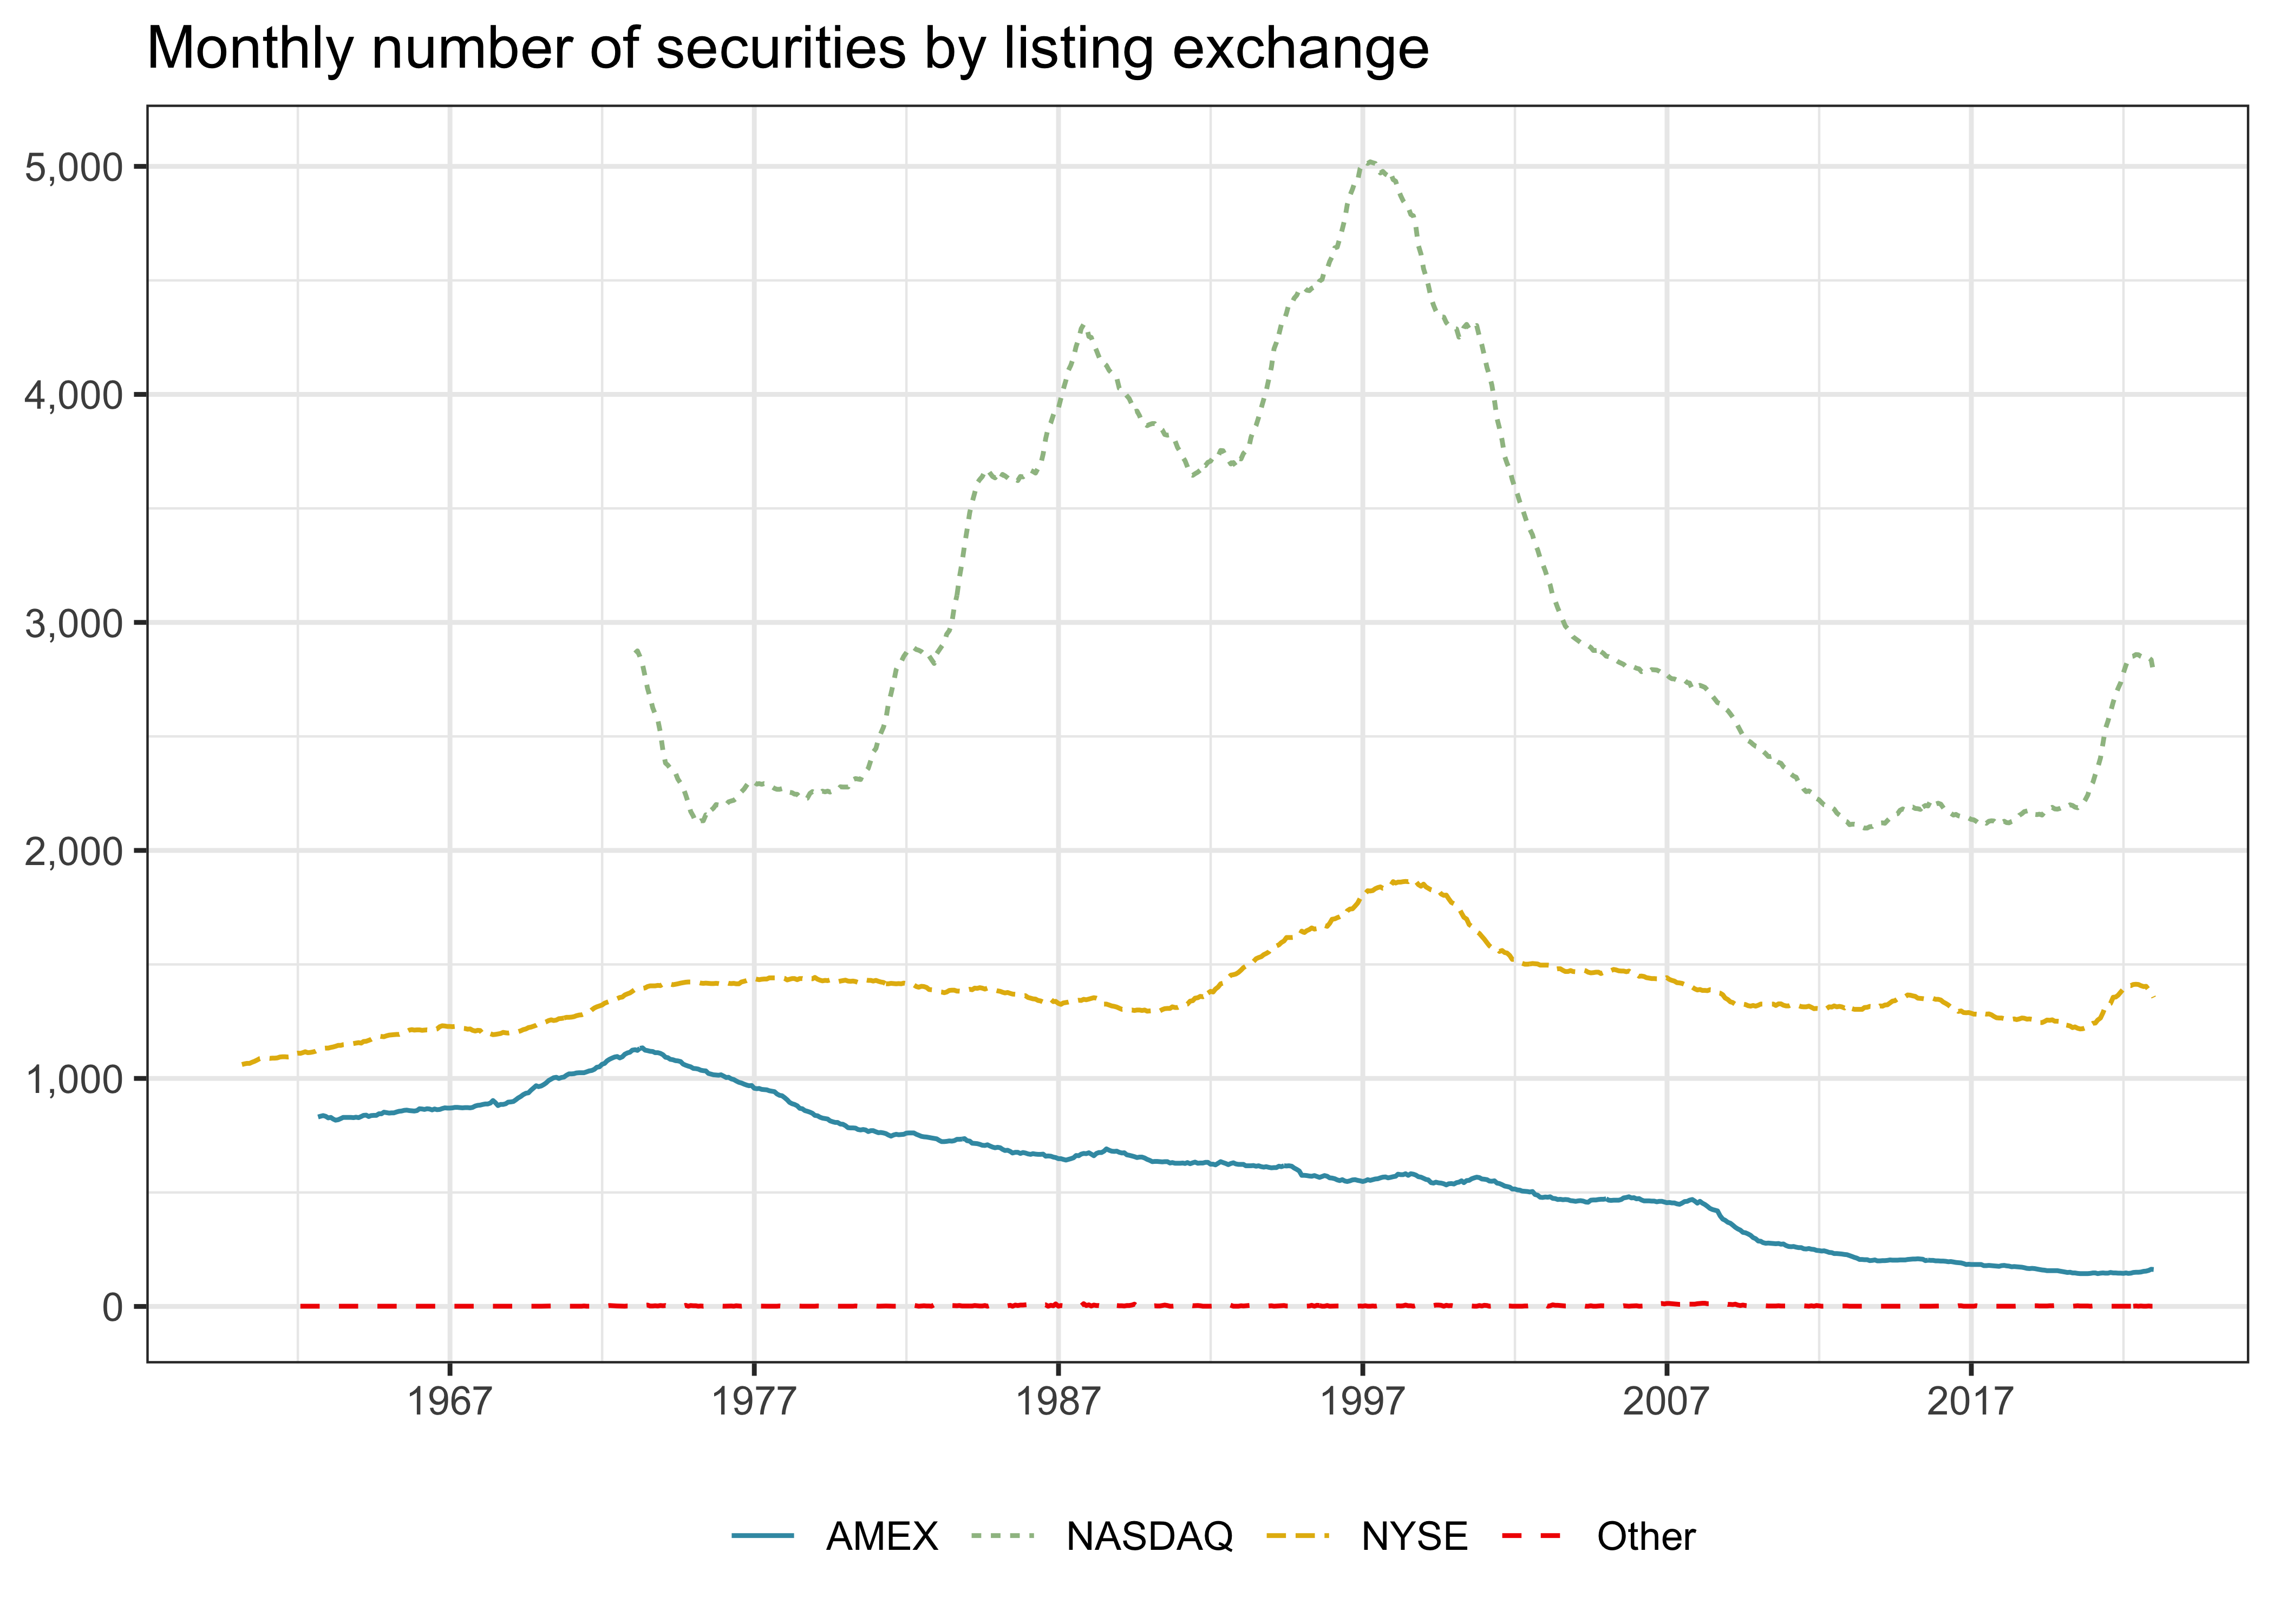 Title: Monthly number of securities by listing exchange. The figure shows a line chart with the number of securities by listing exchange from 1960 to 2021. In the earlier period, NYSE dominated as a listing exchange. There is a strong upwards trend for NASDAQ. Other listing exchanges do only play a minor role.